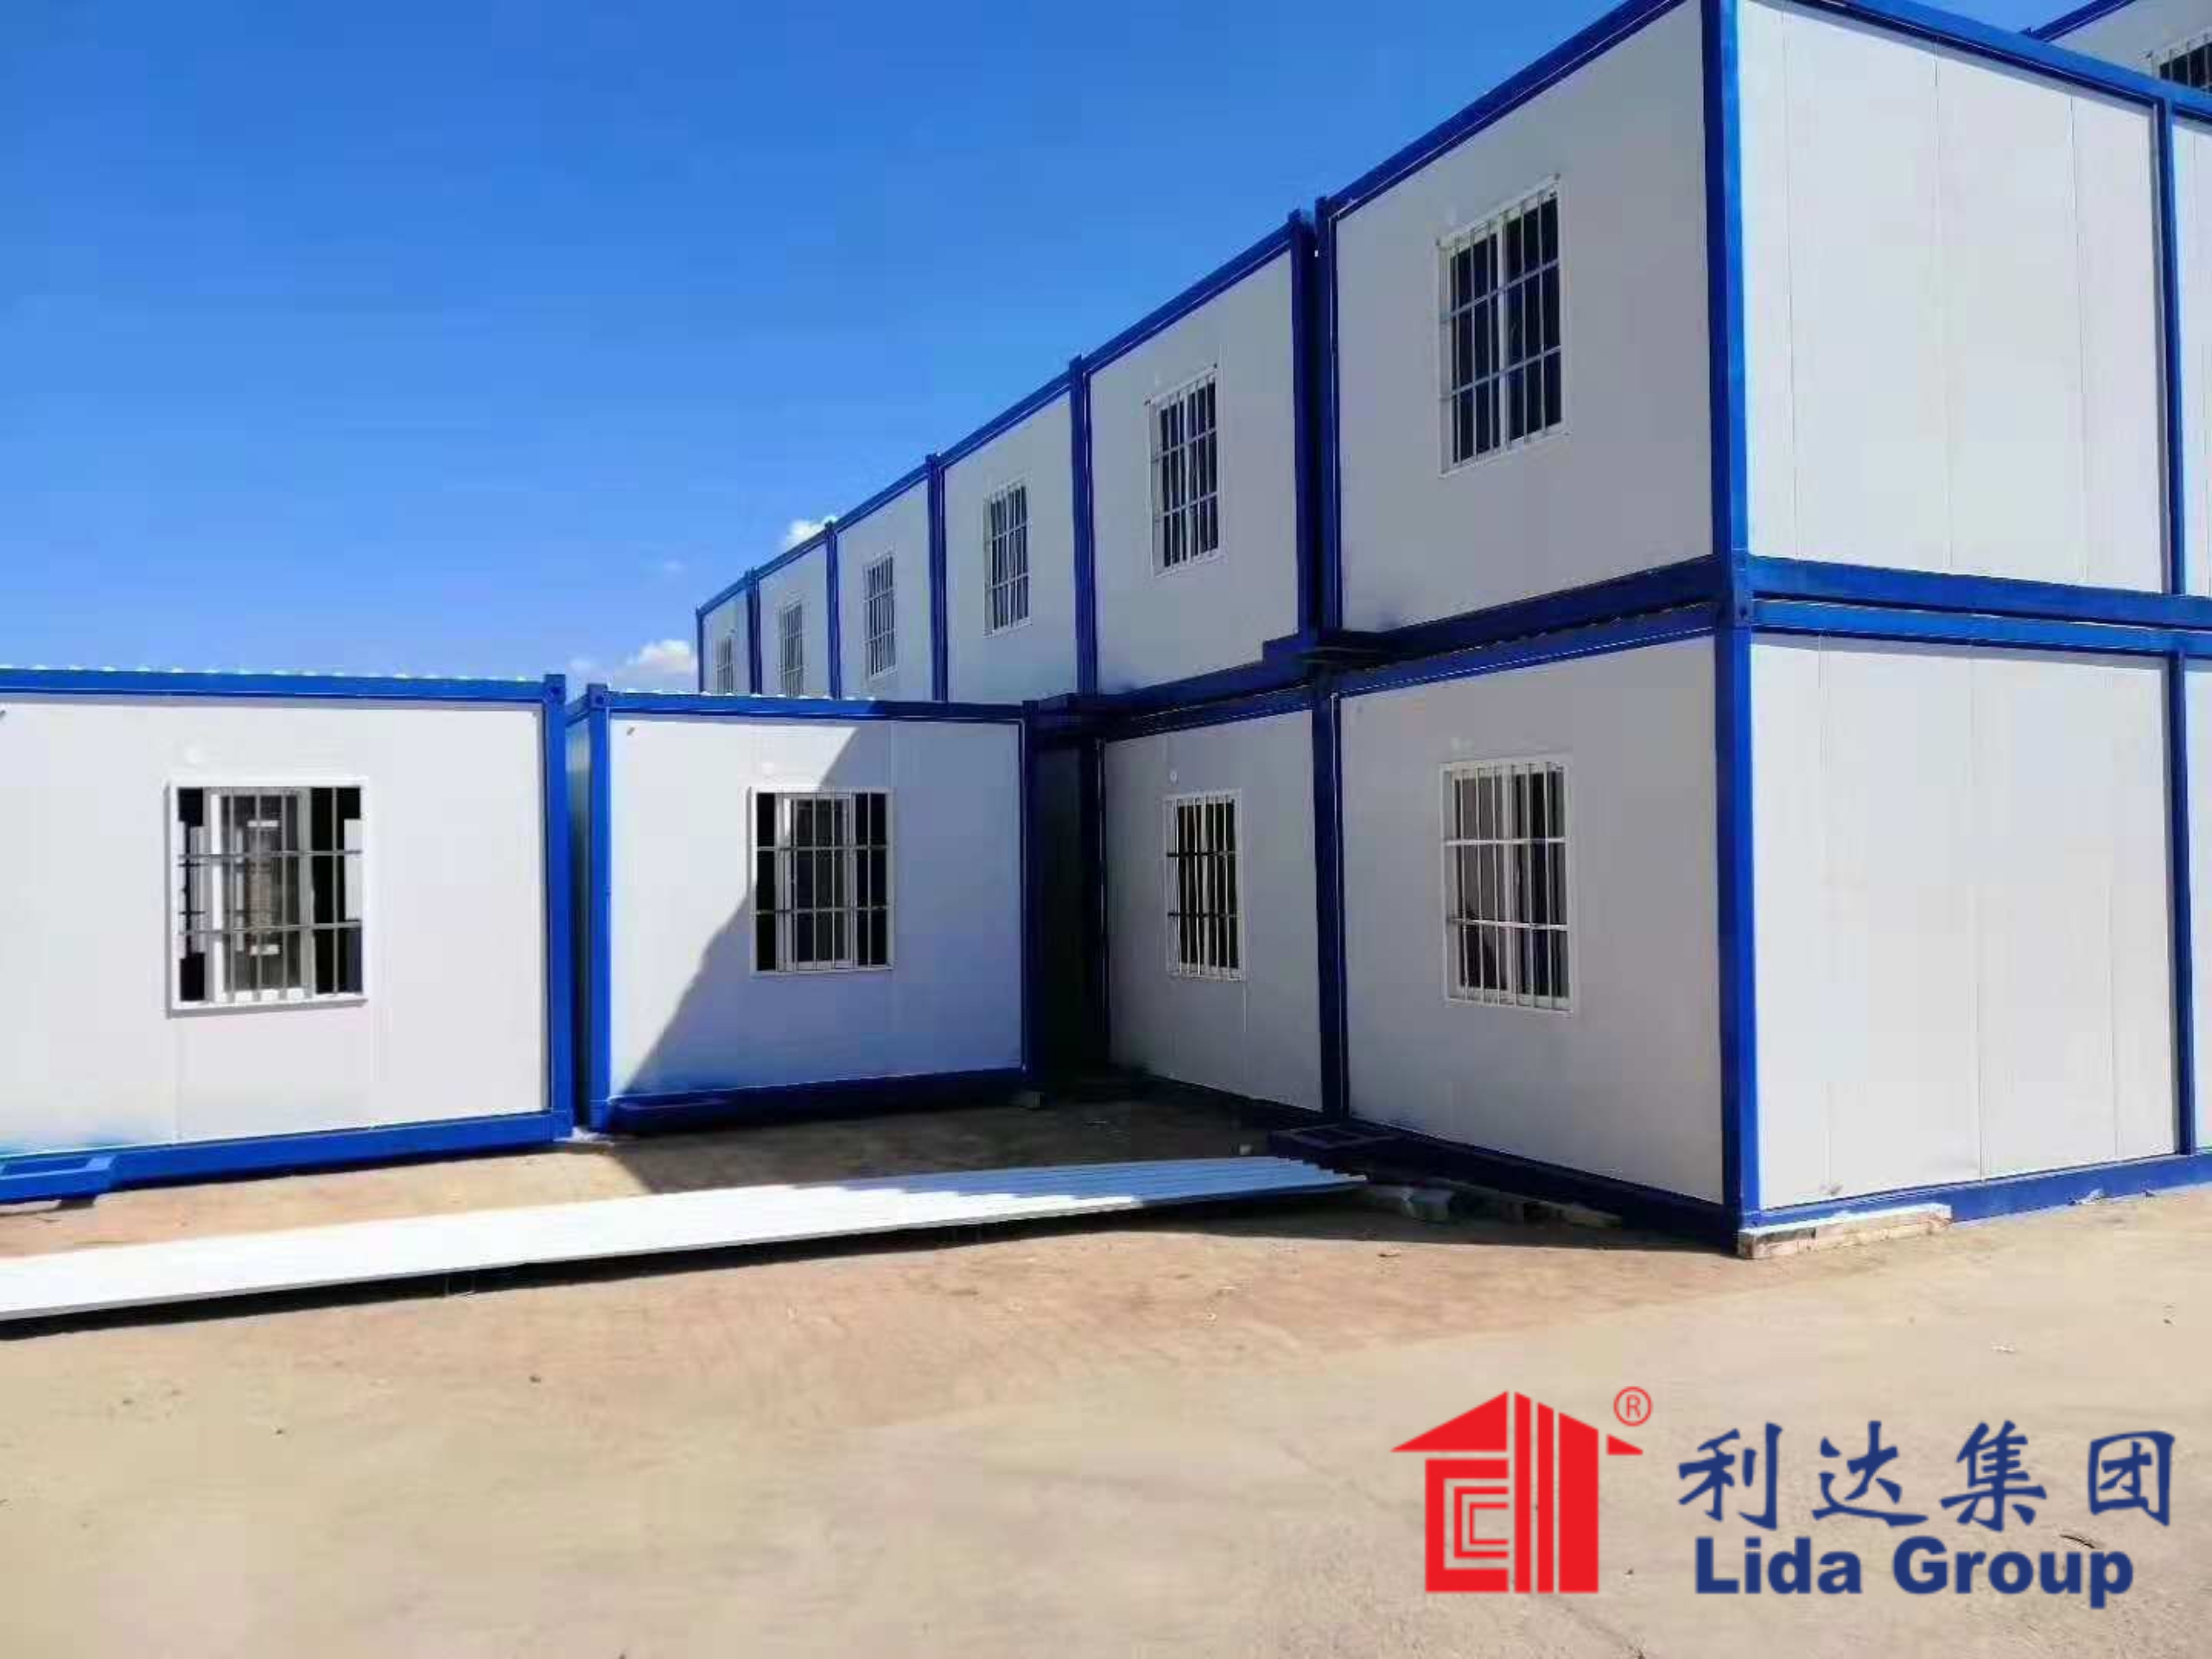 Cutting edge or copycat? Lida Group defends its patented approach to producing completely assembled container apartment communities off-site and within tight deadlines.